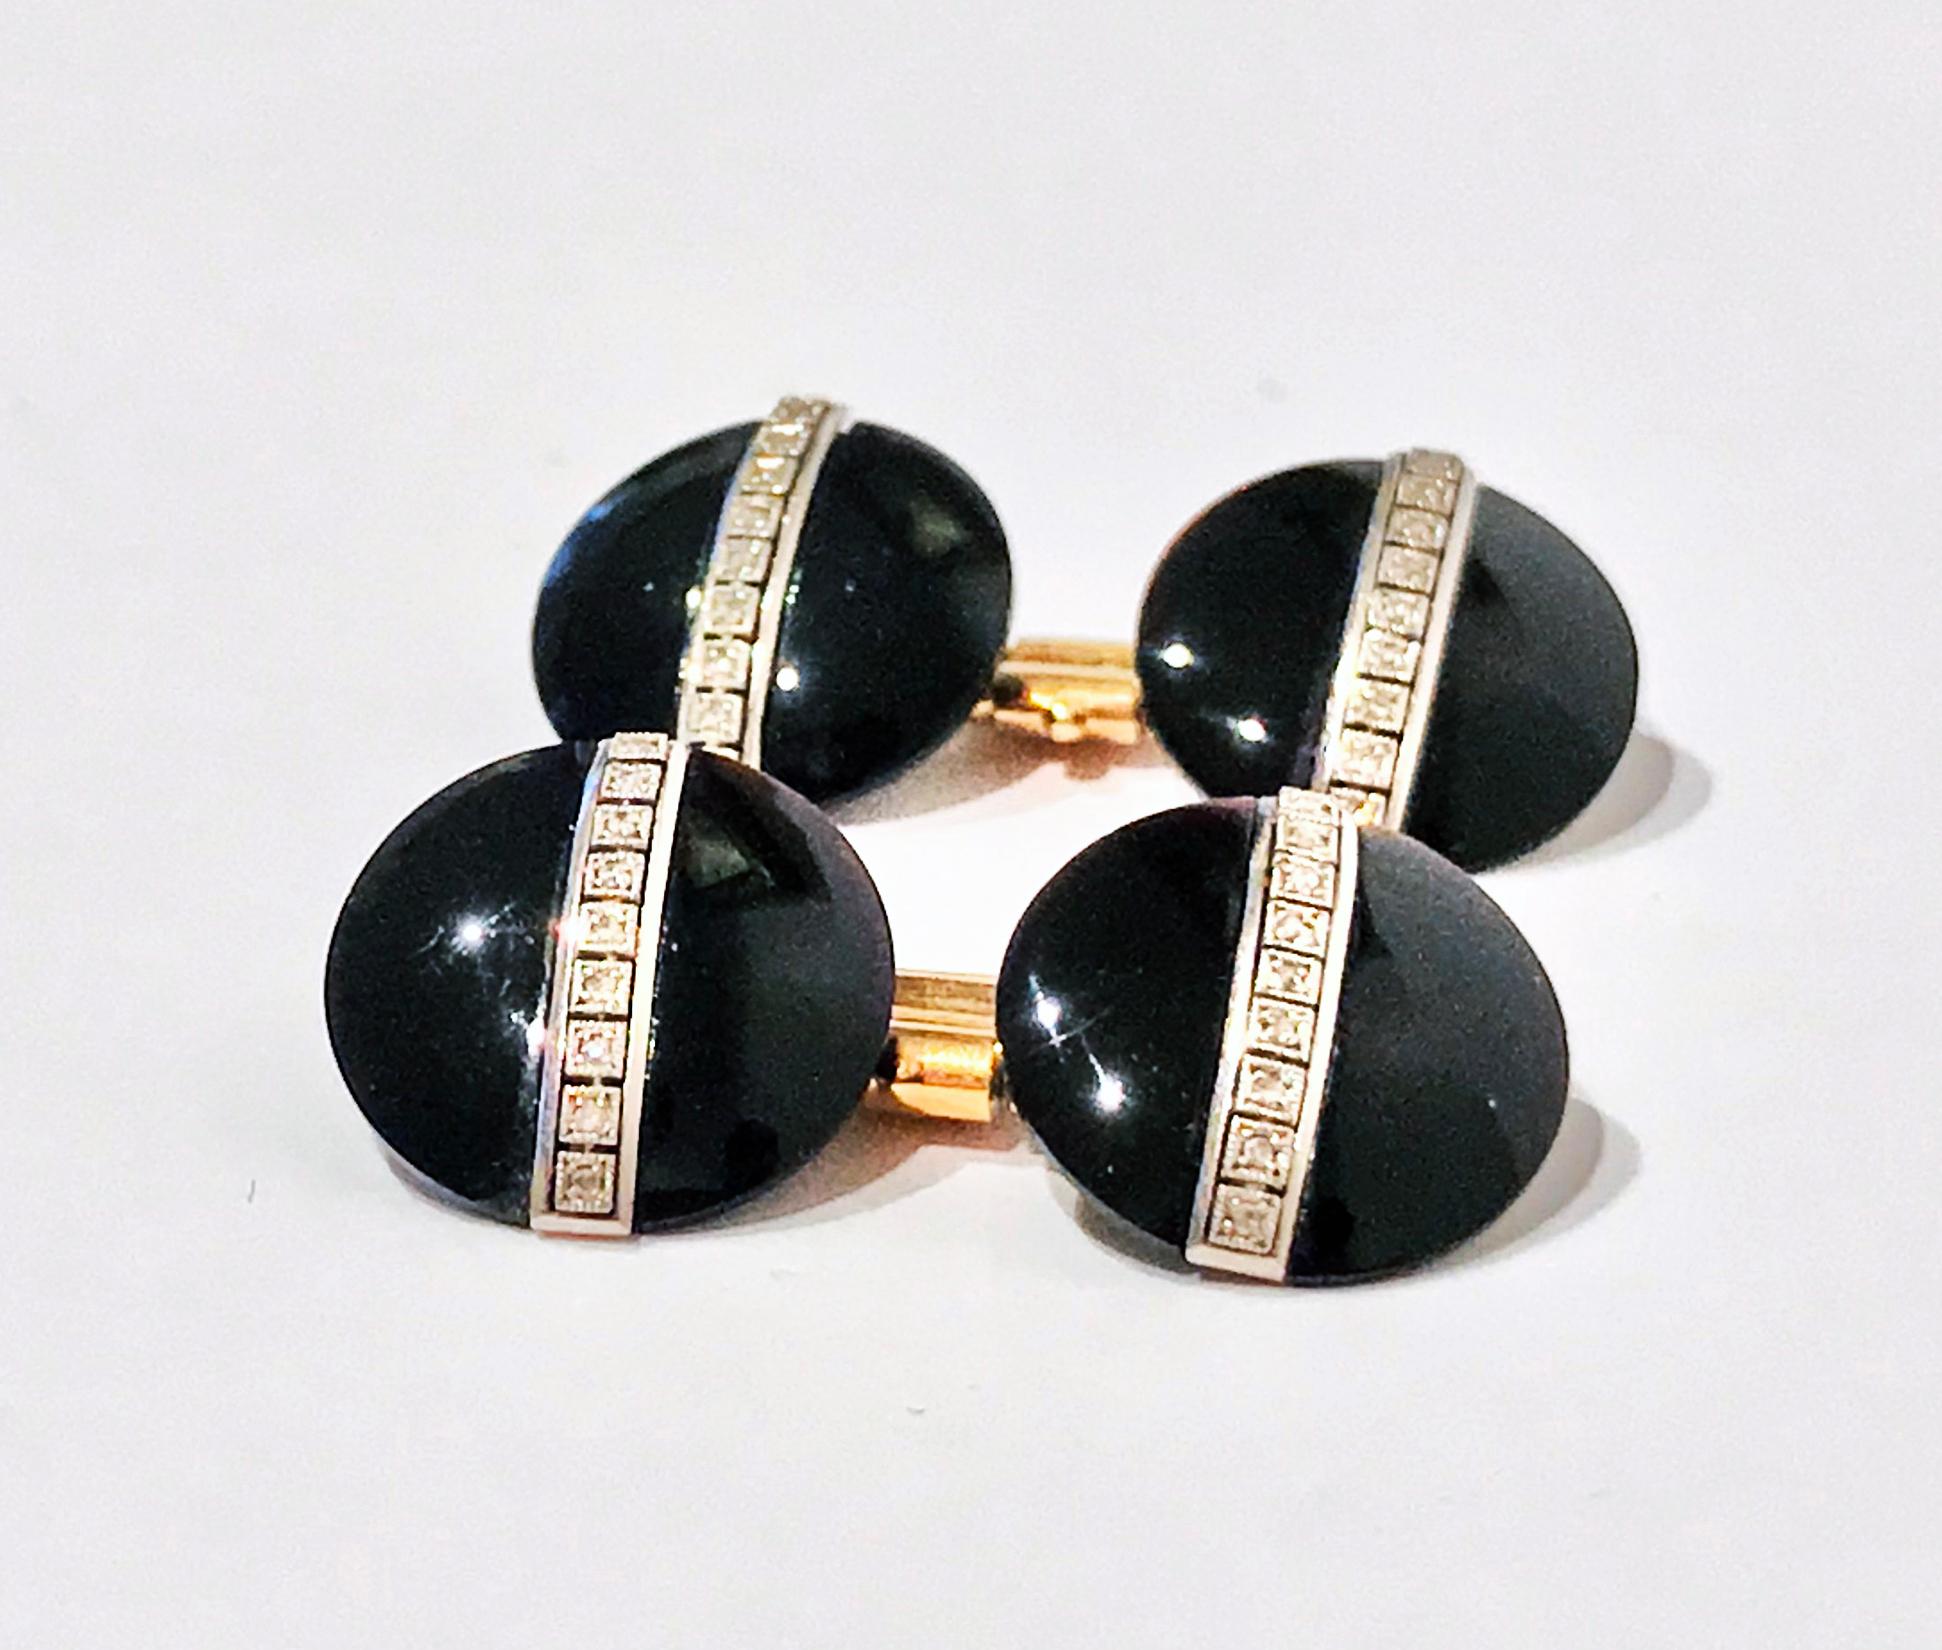 Pair of Art Deco 14K Onyx and Diamond Cufflinks, C.1930. The double-sided cufflinks of circular black onyx button style, gauging approximately 15 mm diameter, each part with a central band of nine milligrain set rose cut diamonds, gold crimped chain